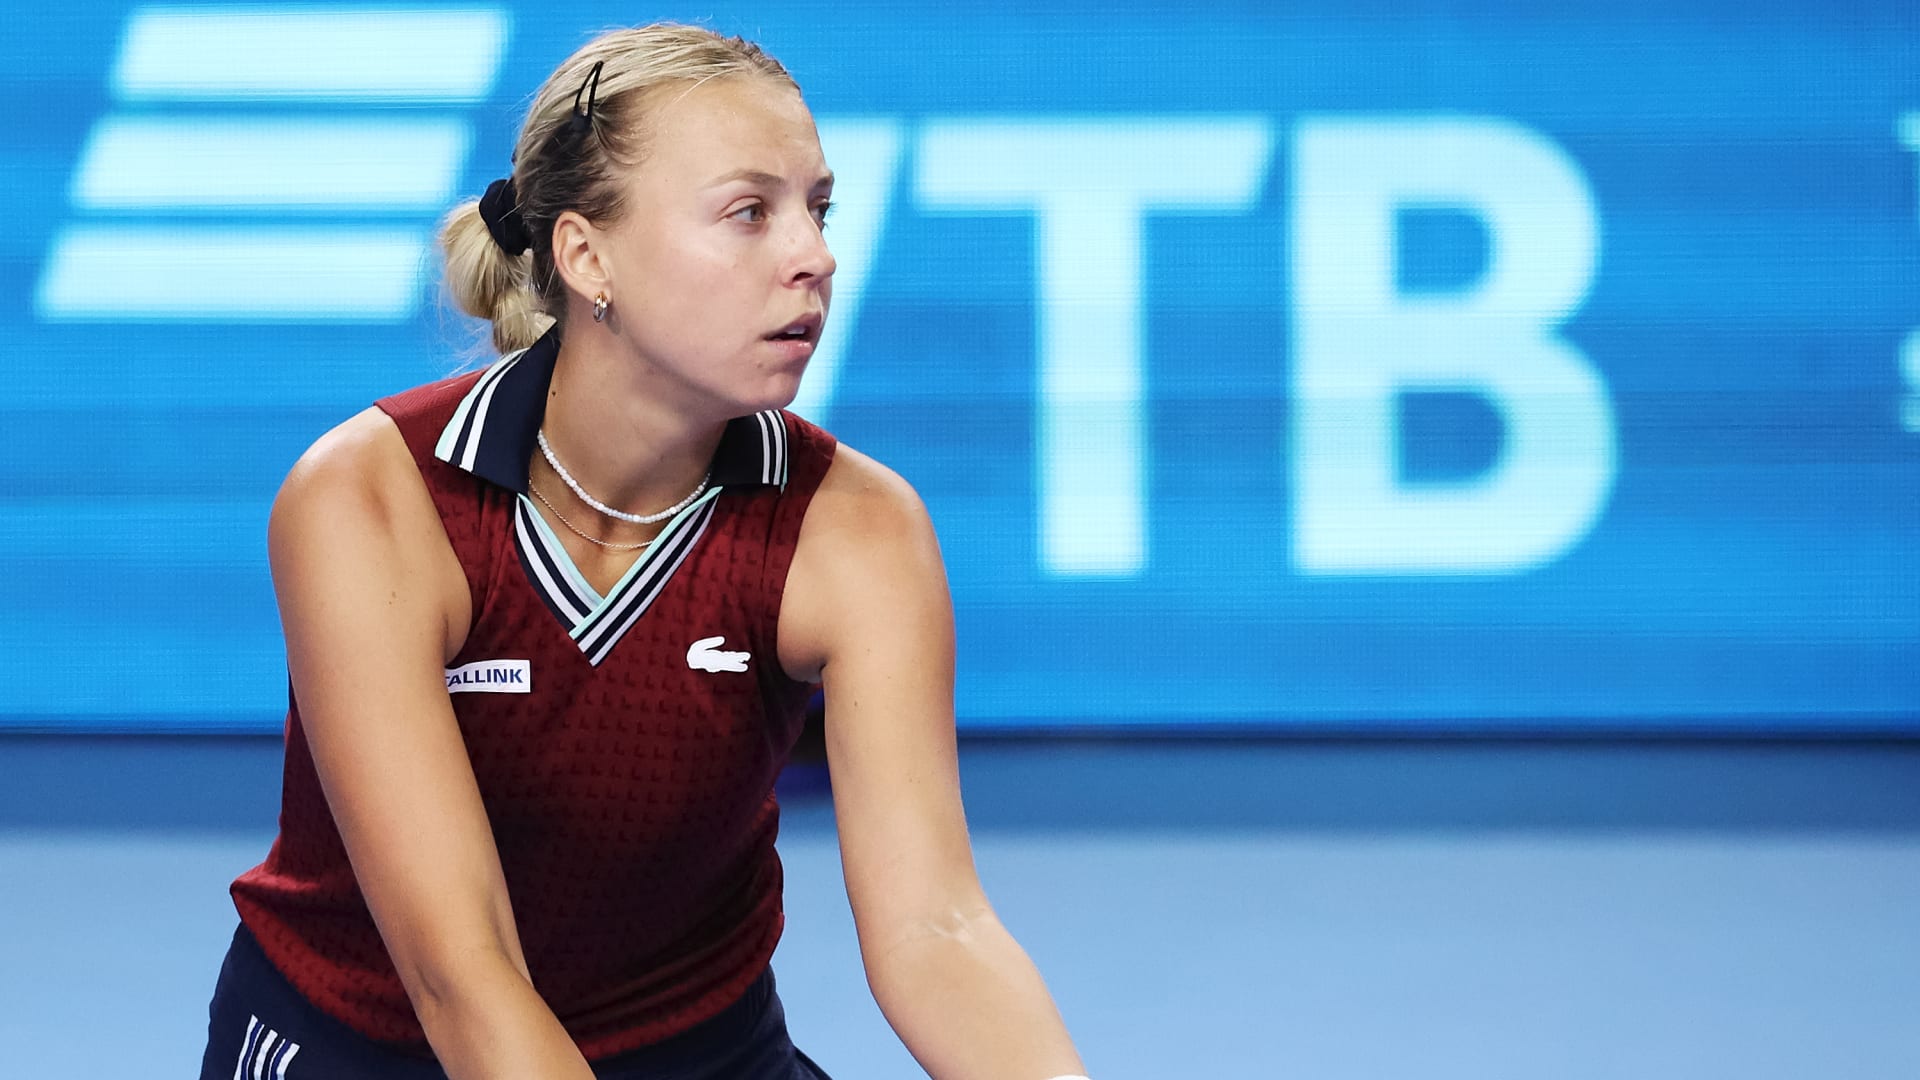 It all comes down to Anett WTA Finals field to be decided between Kontaveit, Ons Jabeur in Cluj-Napoca